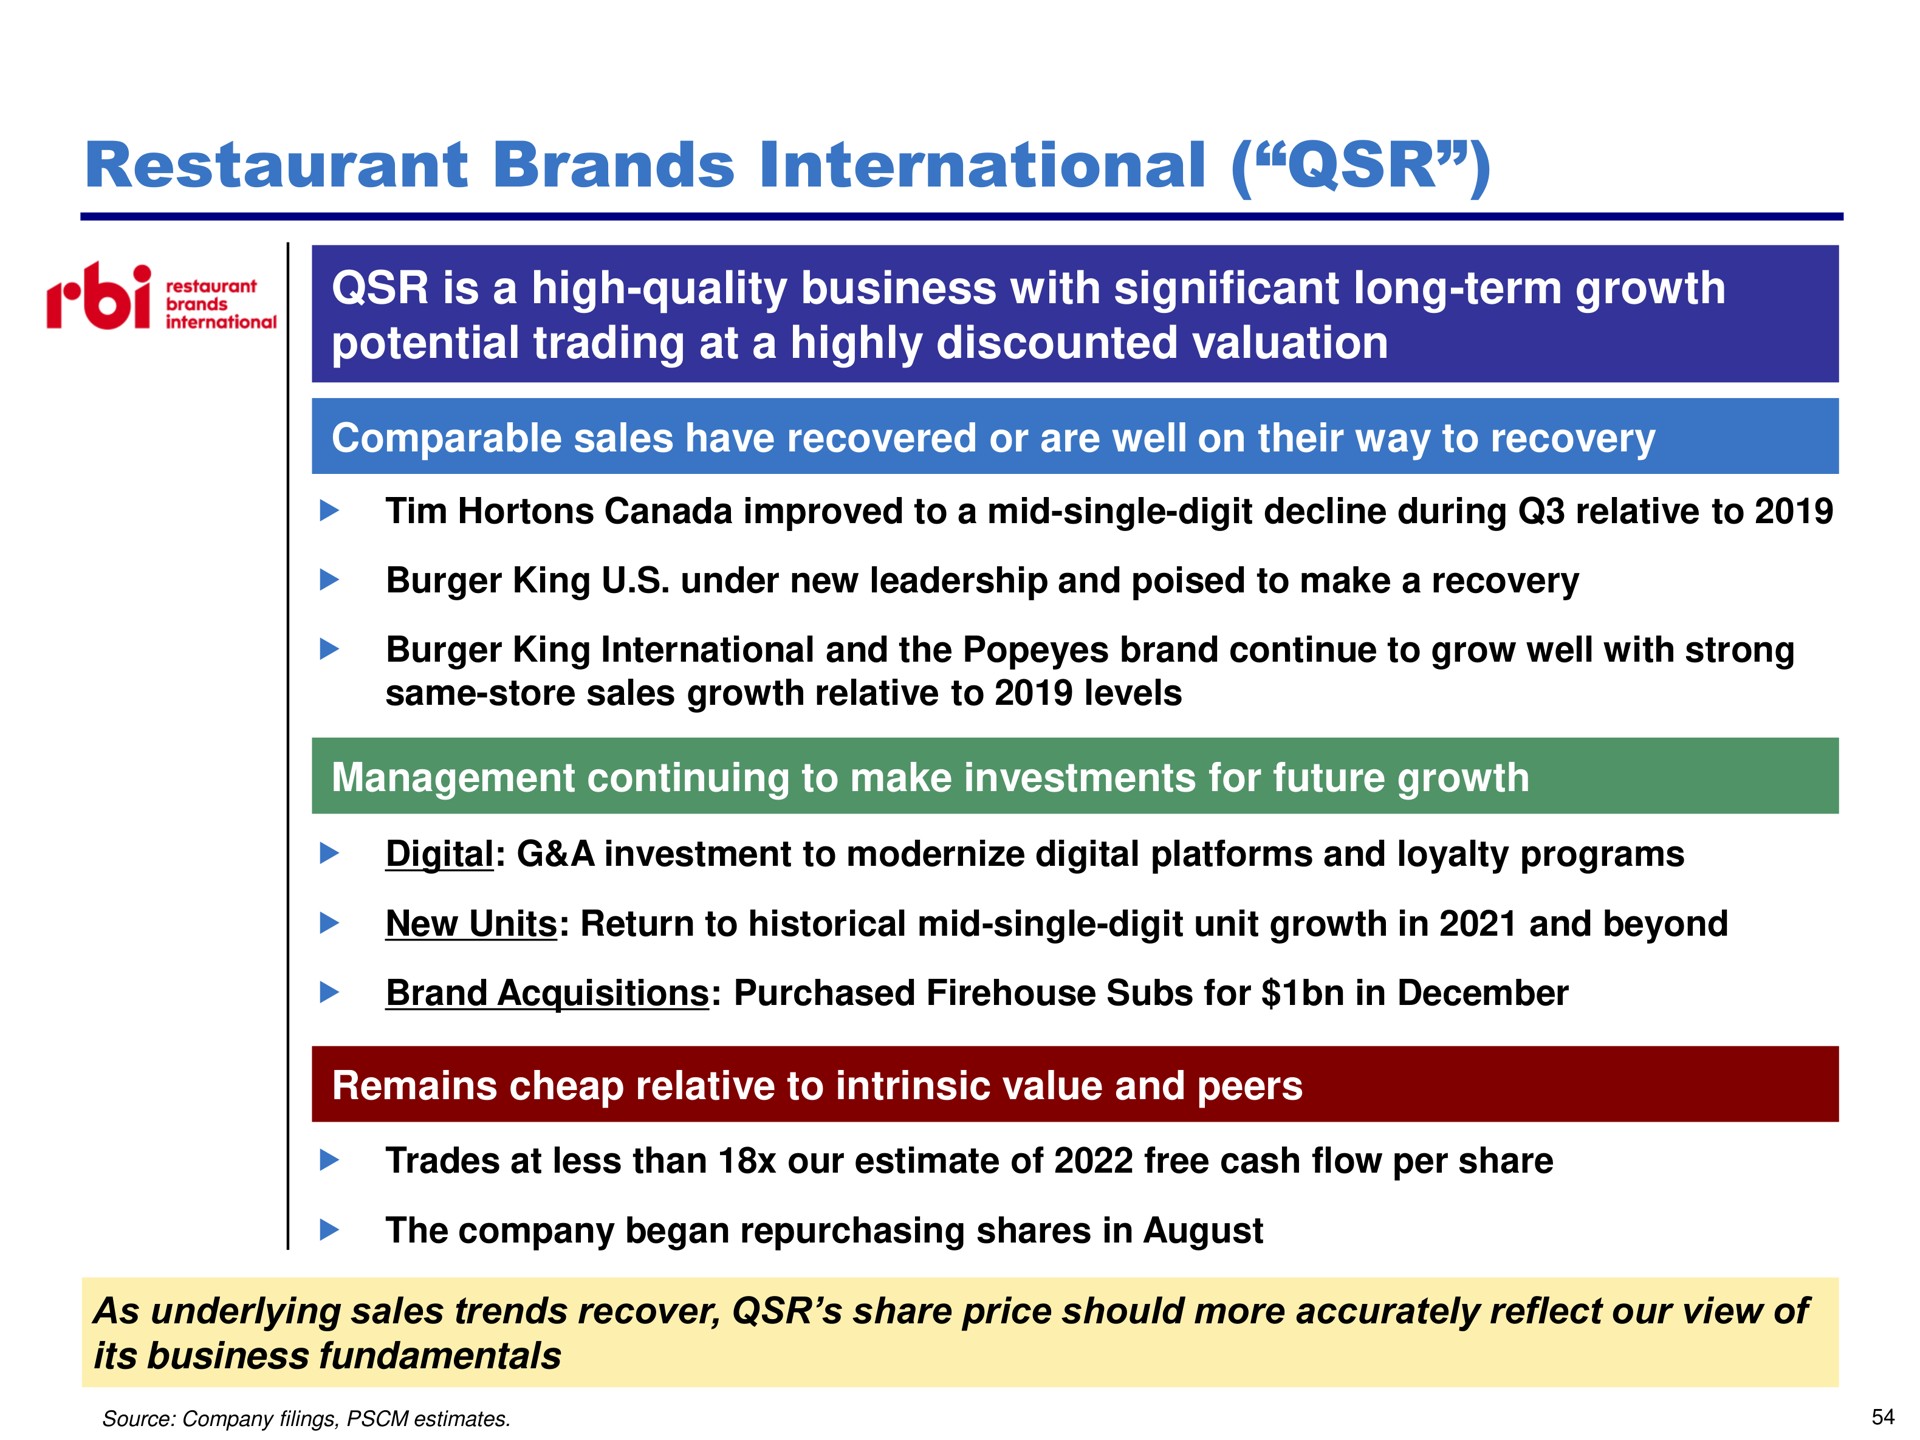 restaurant brands international roi is a high quality business with significant long term growth mile me tile | Pershing Square